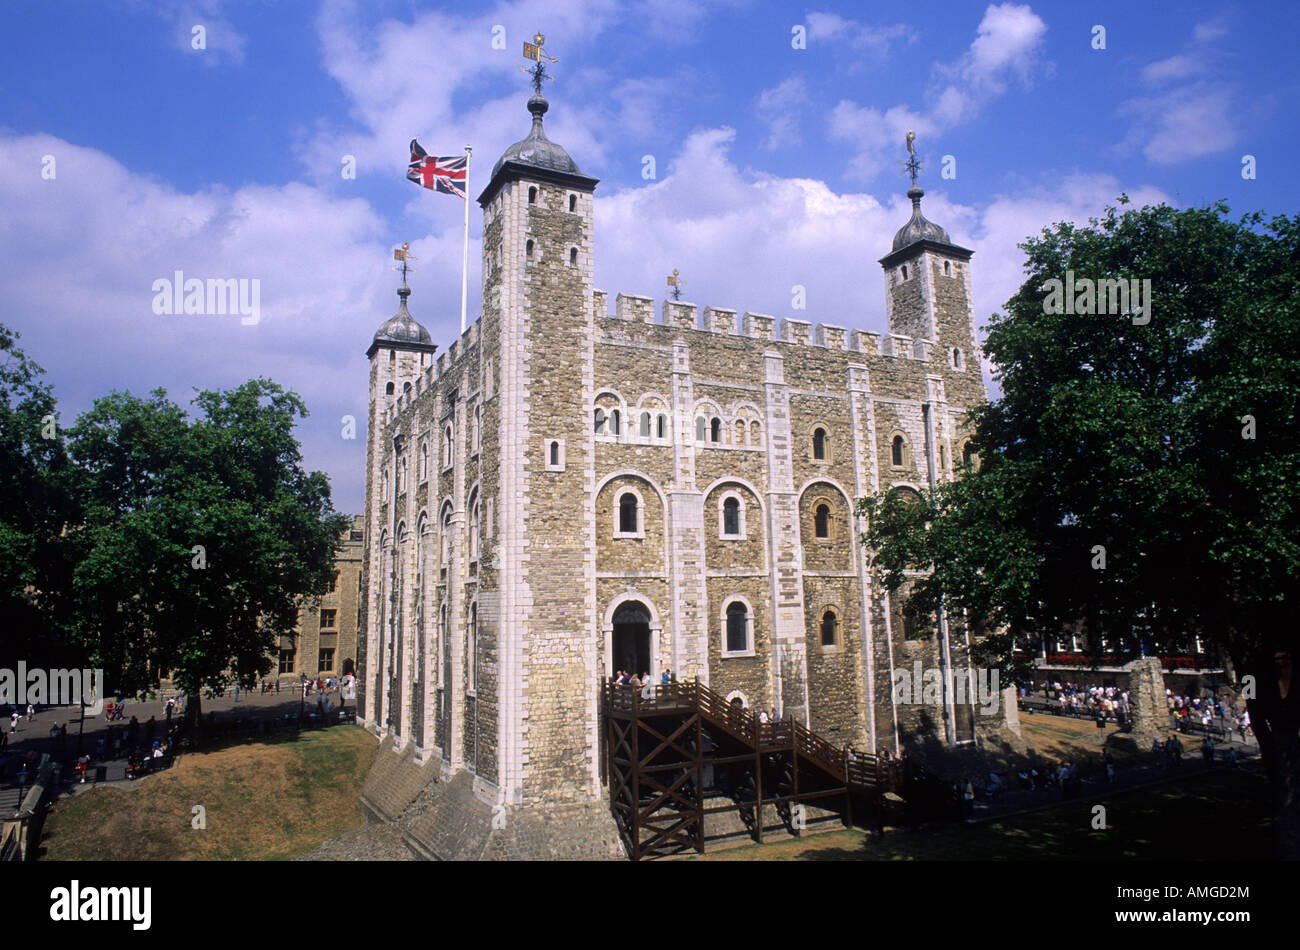 Tower of London, The White Tower Union Jack flag 12th century Norman architecture castle keep fortress England UK English Stock Photo